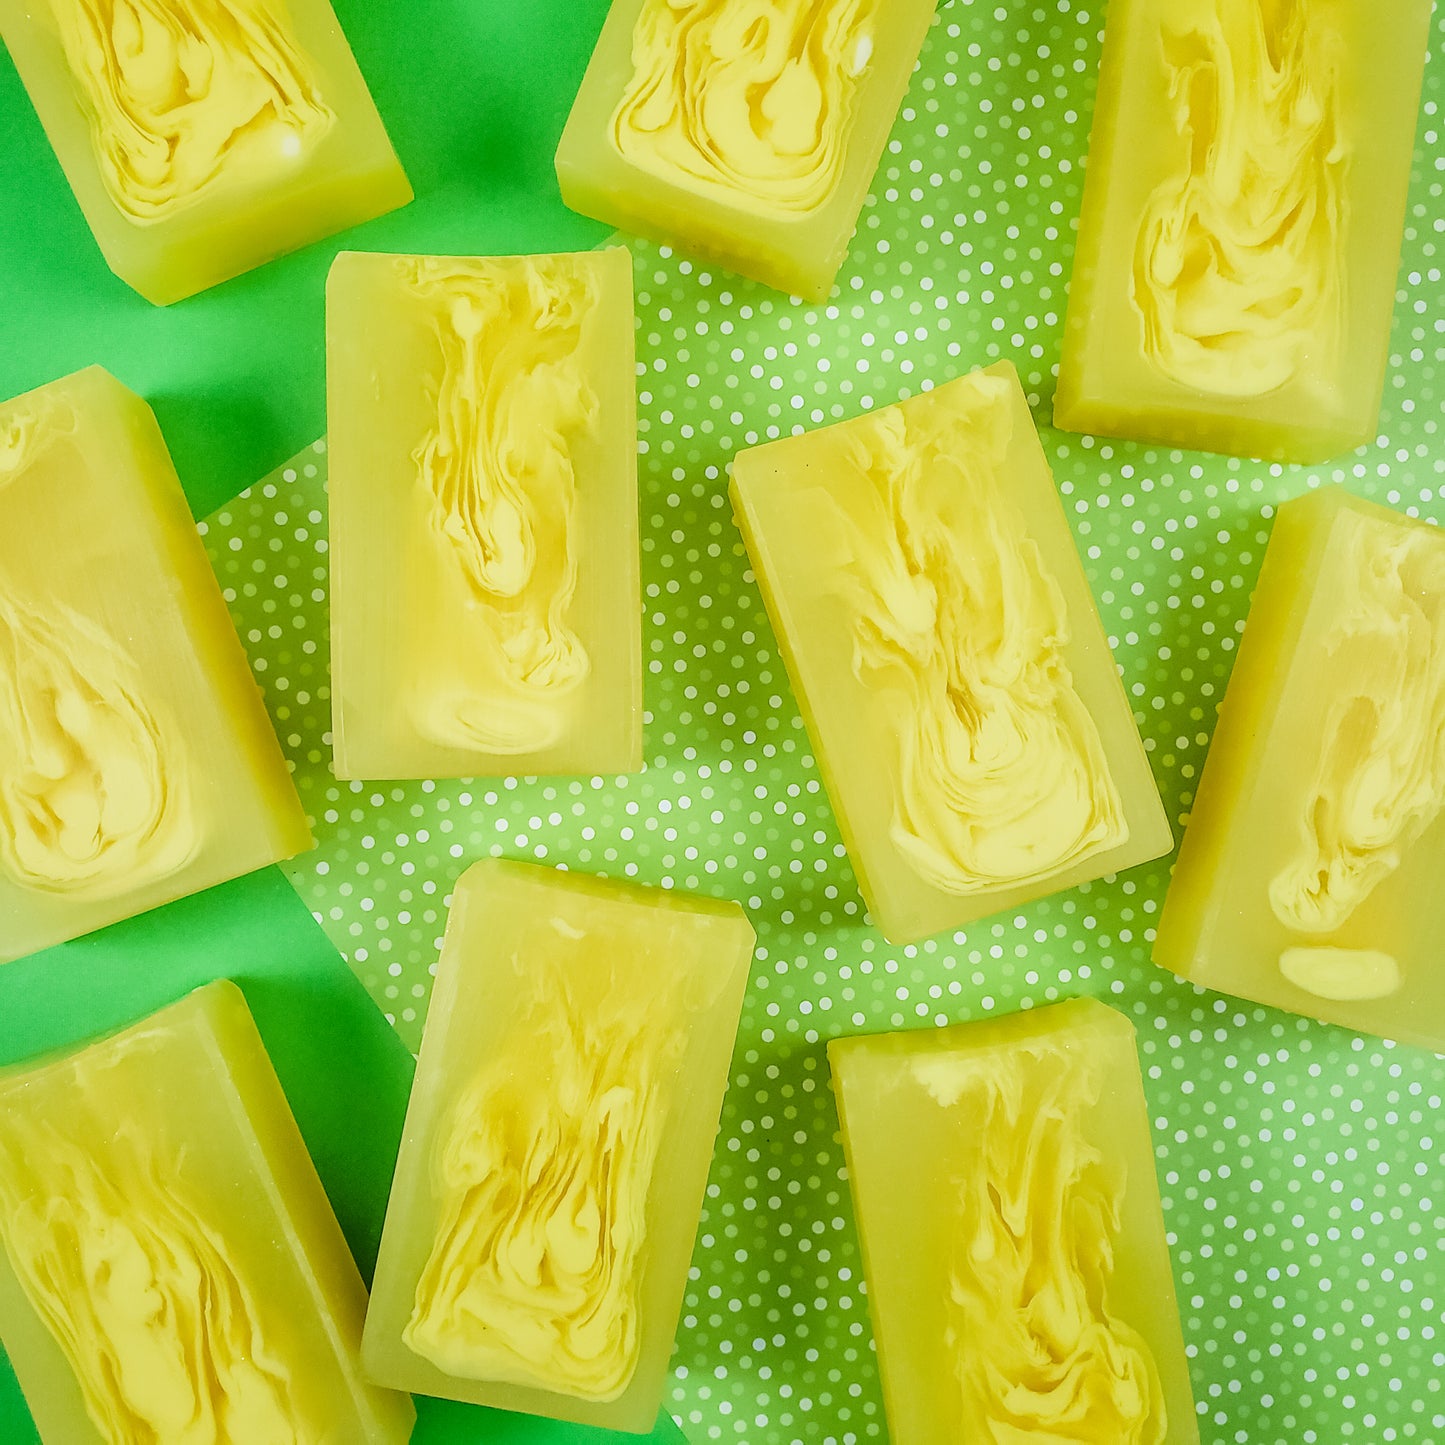 yellow bar soaps with light yellow swirls in them. on a green background